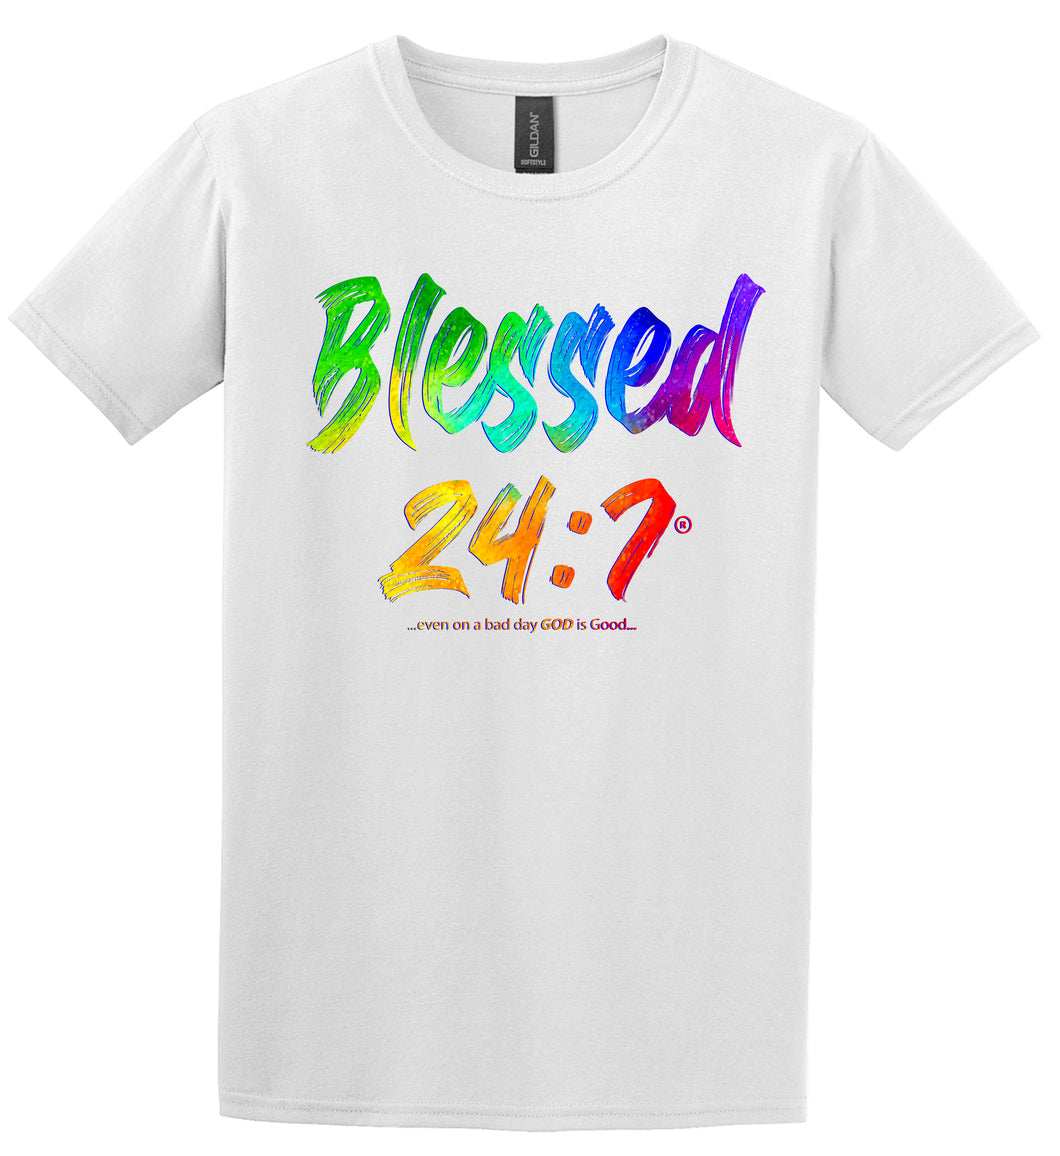 Blessed 24:7®️ Watercolors T-shirt FREE SHIPPING